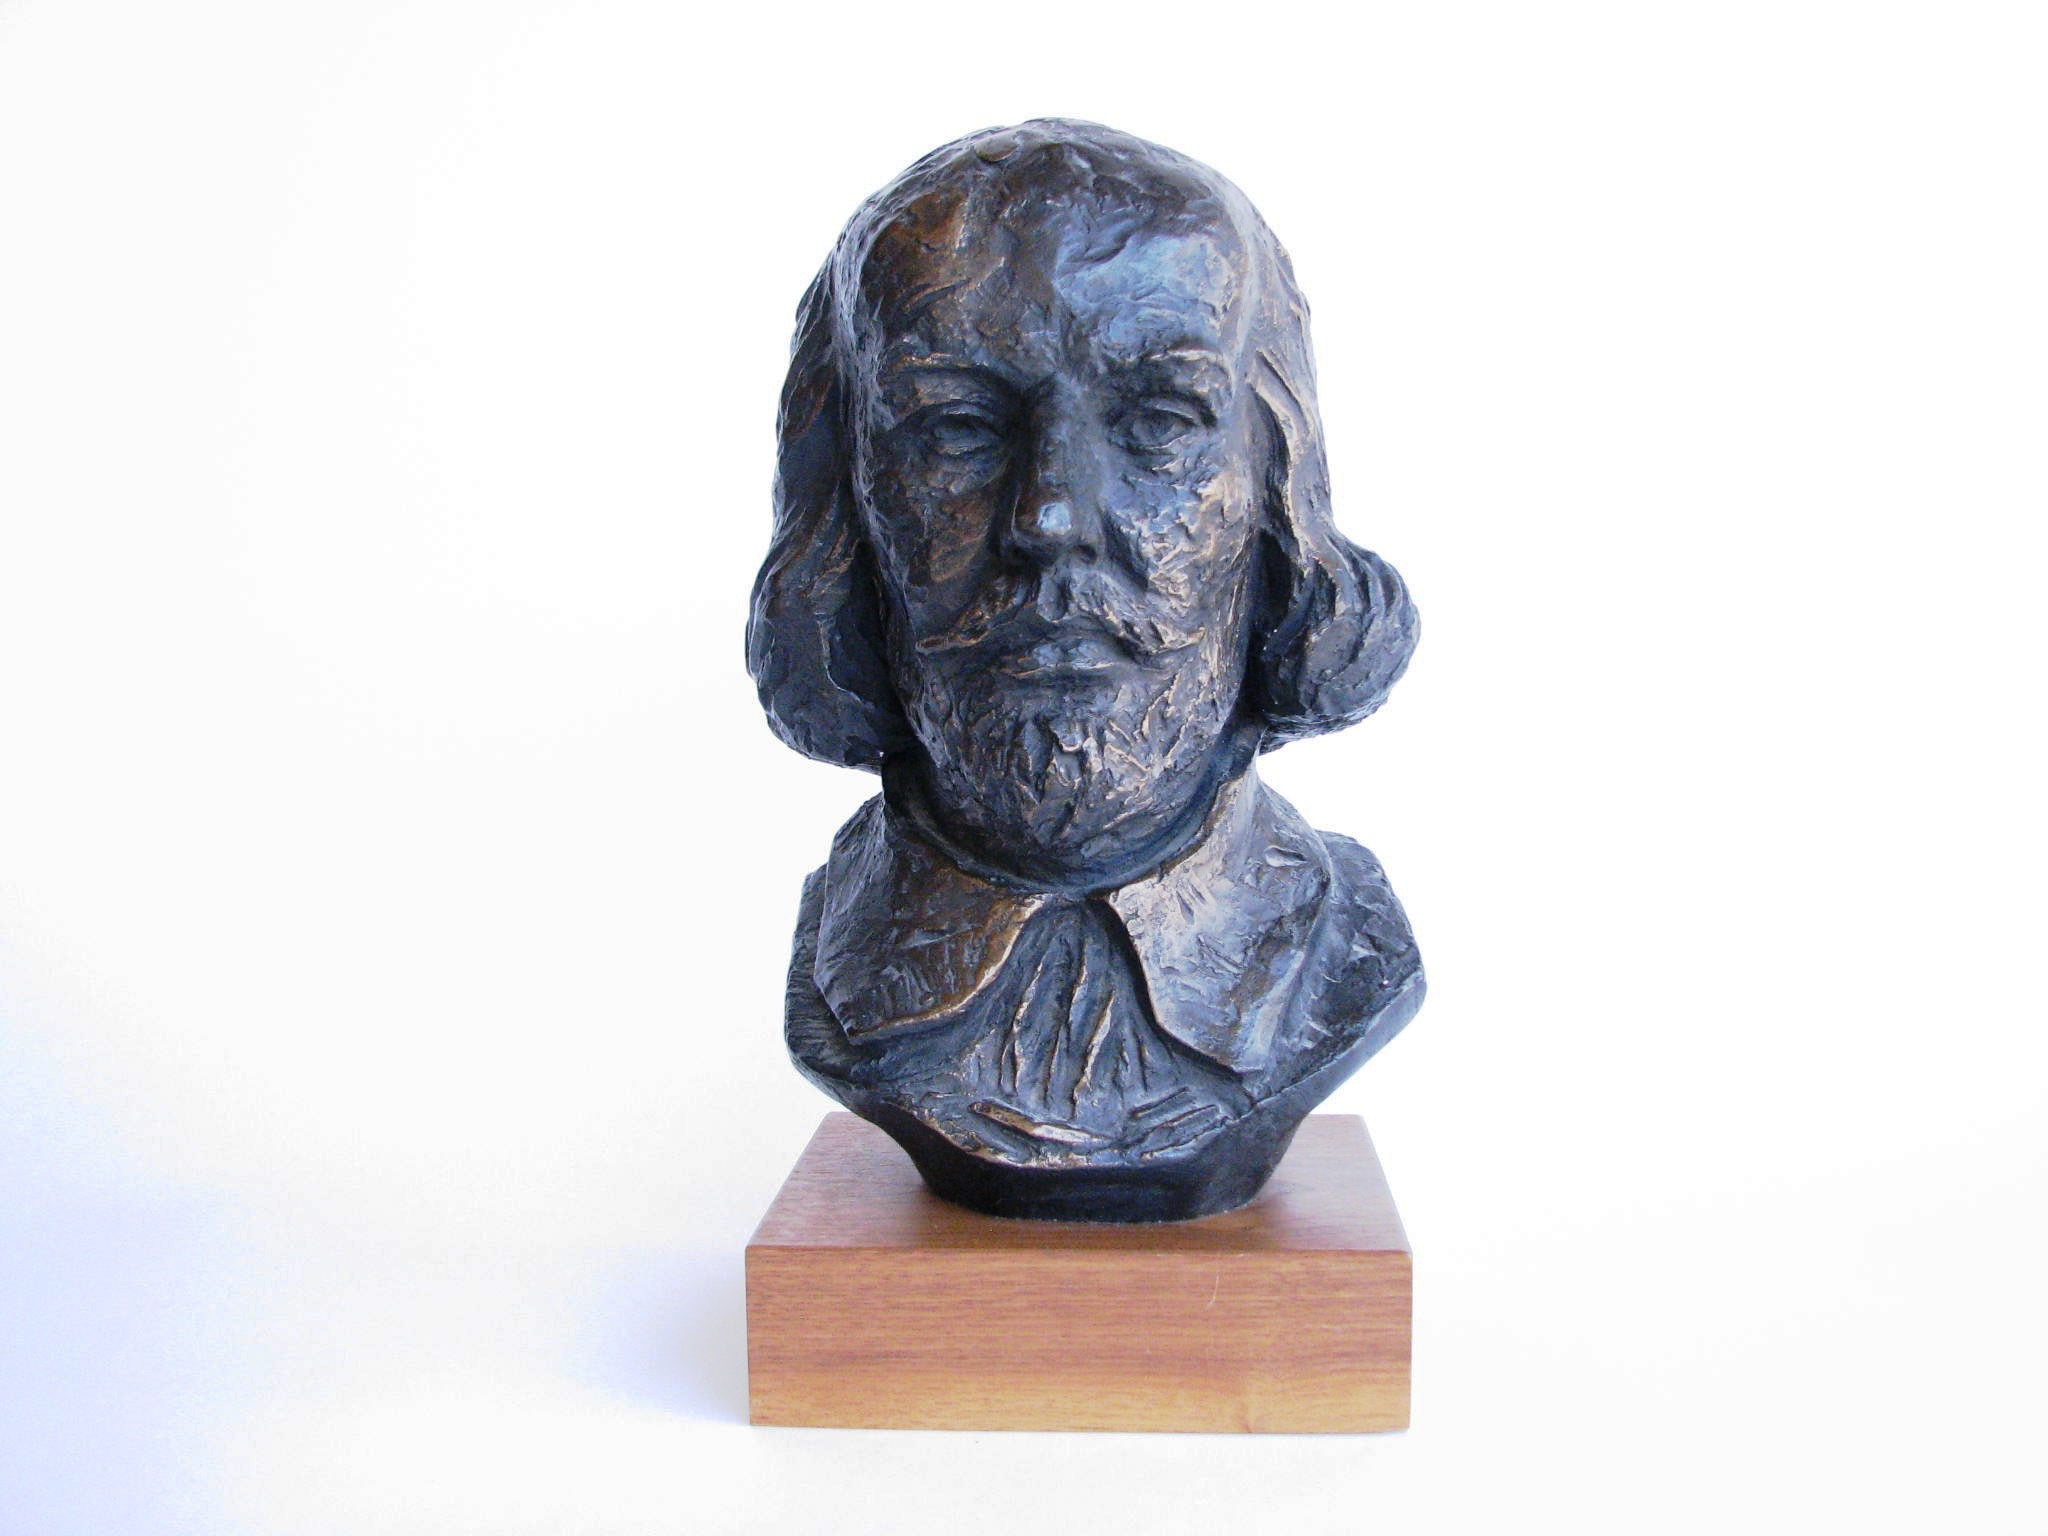 edgebrookhouse - 1965 Austin Productions Plaster Bust Sculpture of William Shakespeare